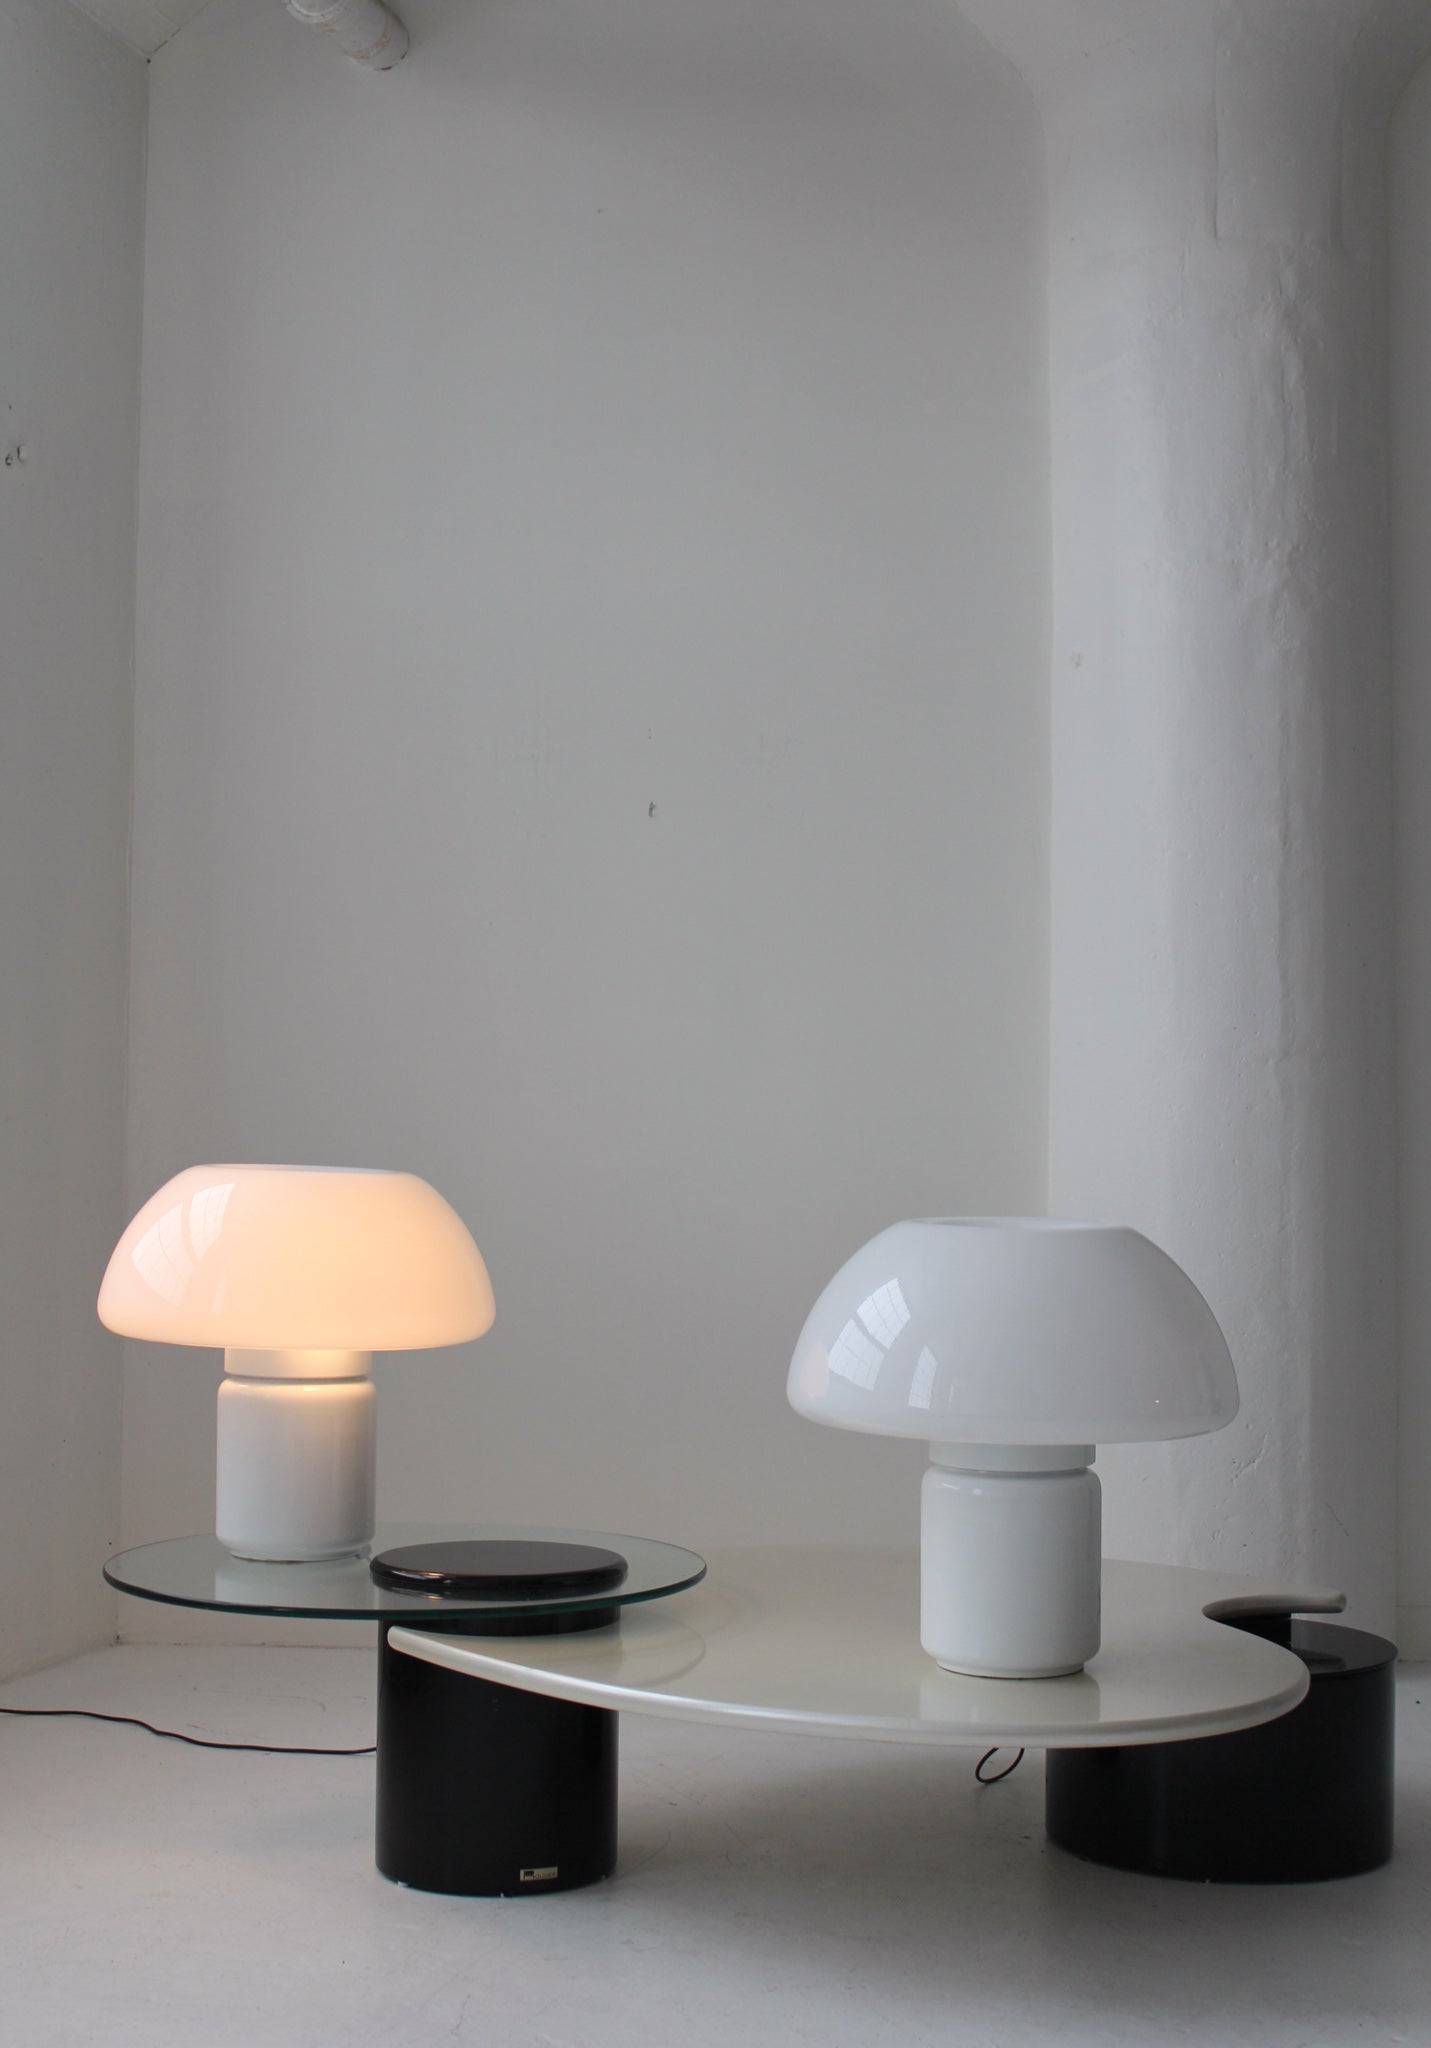 Model 625 Table Lamp by Elio Martinelli For Martinelli Luce